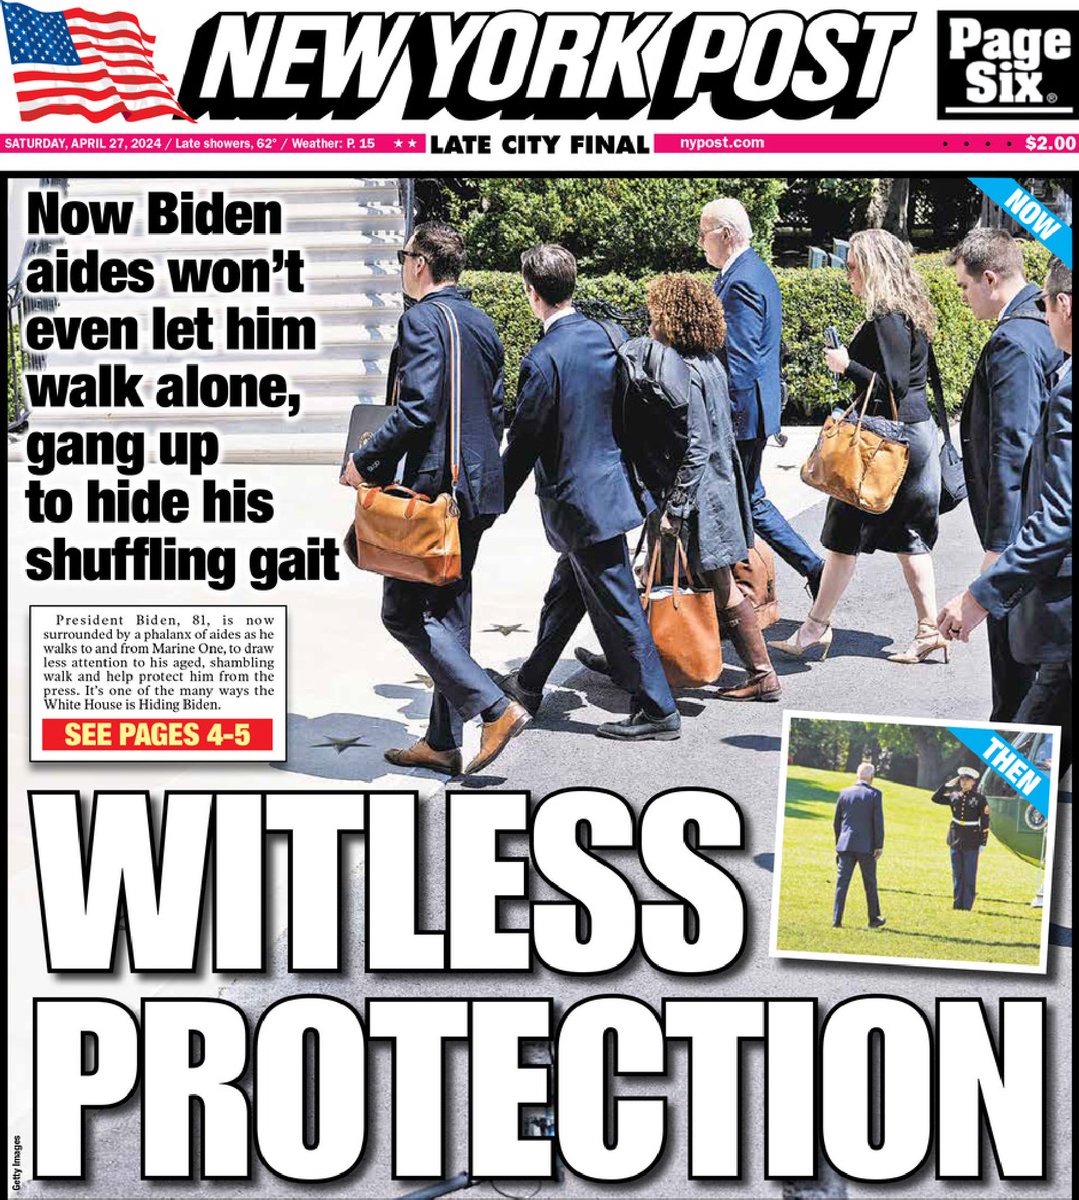 🇺🇸 Witless Protection ▫Biden, 81, has aides flank him on walks to Marine One to block cameras from catching him shuffling, stumbling: report ▫Richard Pollina ▫is.gd/lyDjYH 👈 #frontpagestoday #USA @nypost 🇺🇸